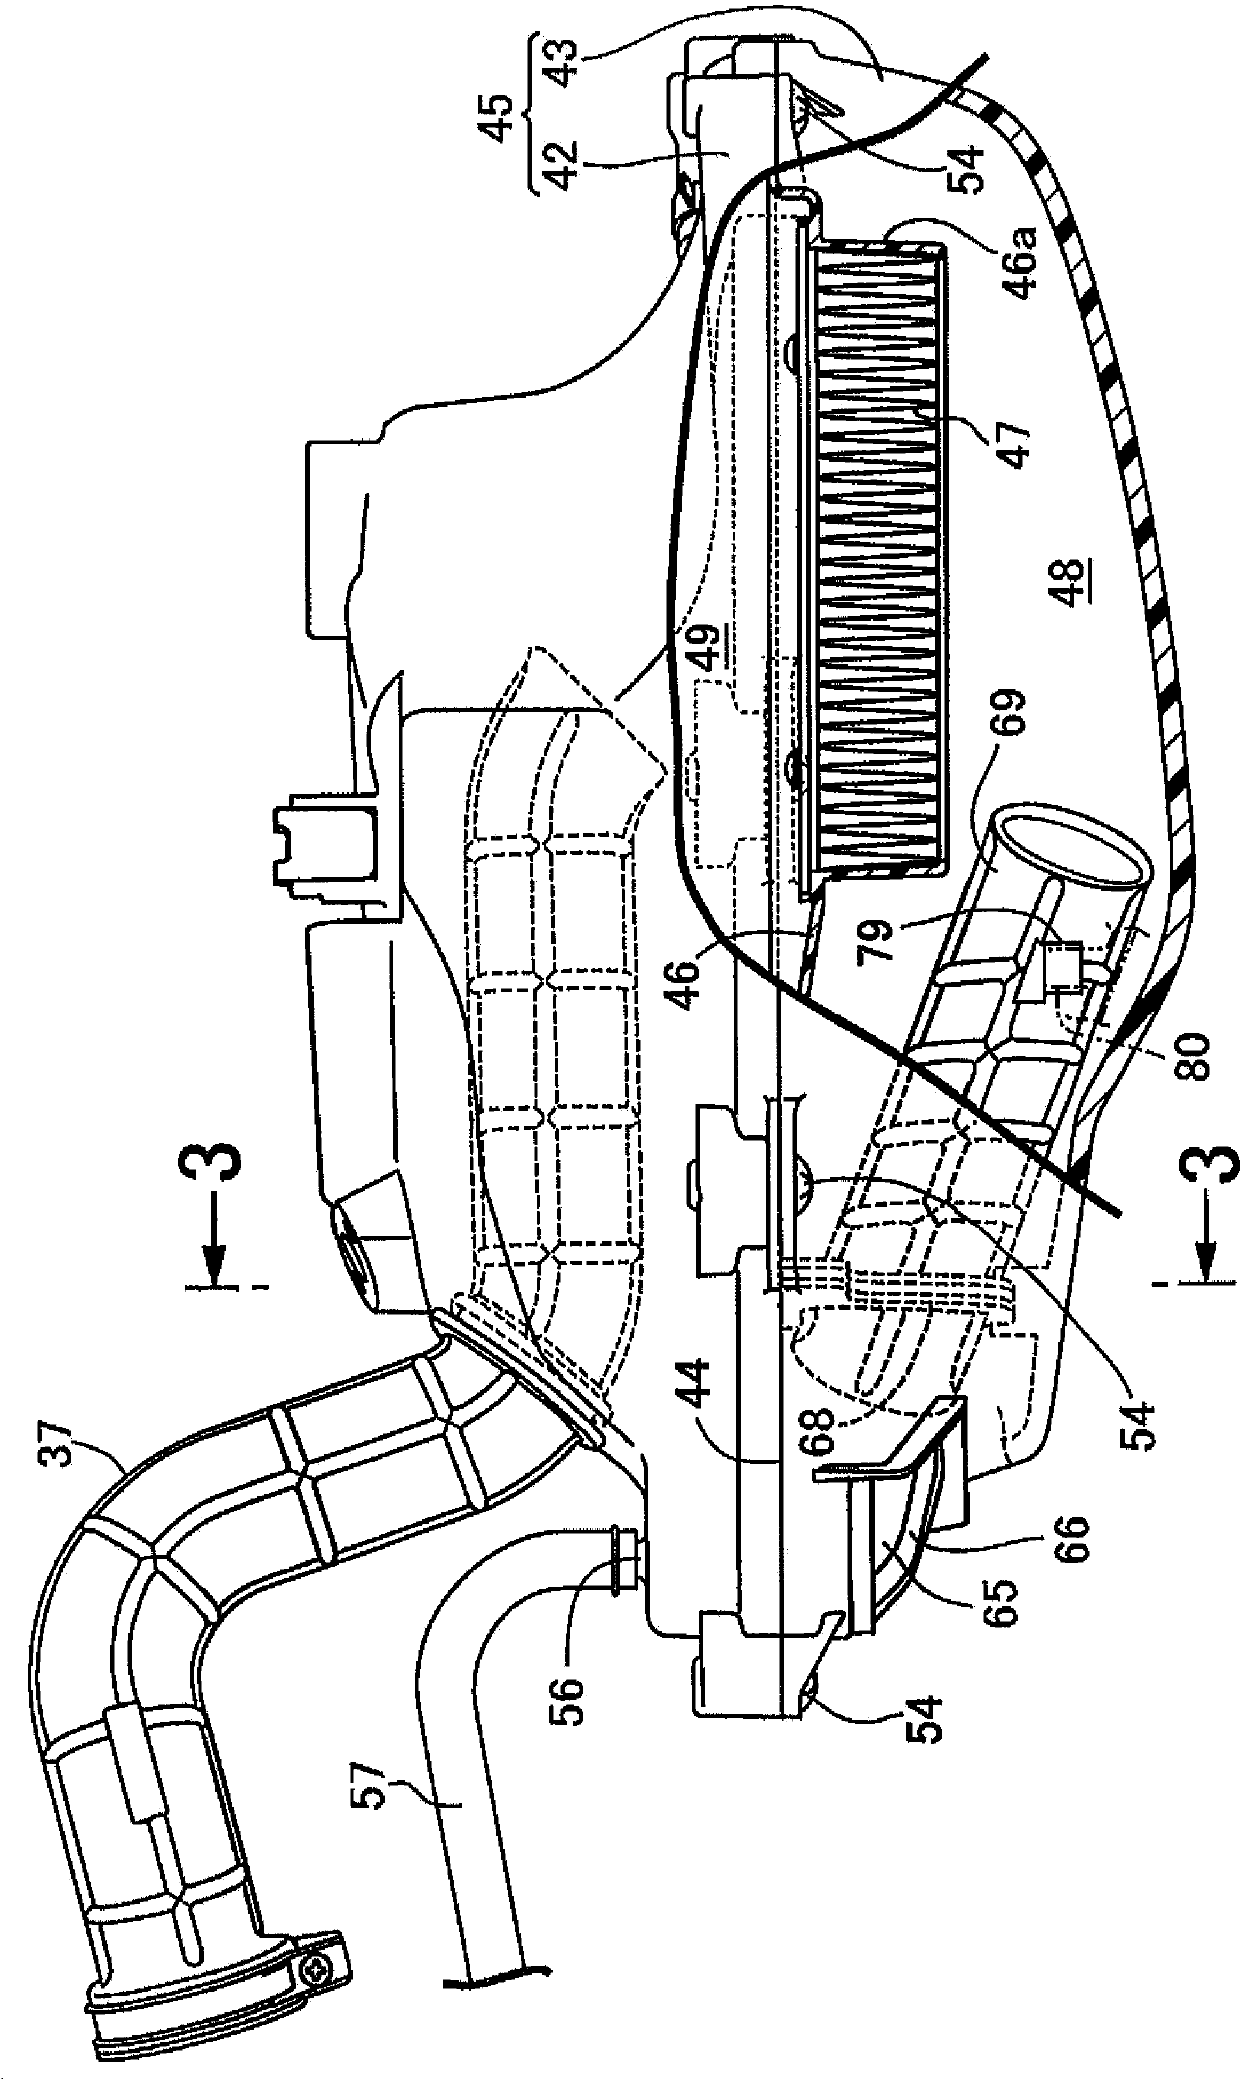 Air filter of internal combustion engine for saddle type vehicle